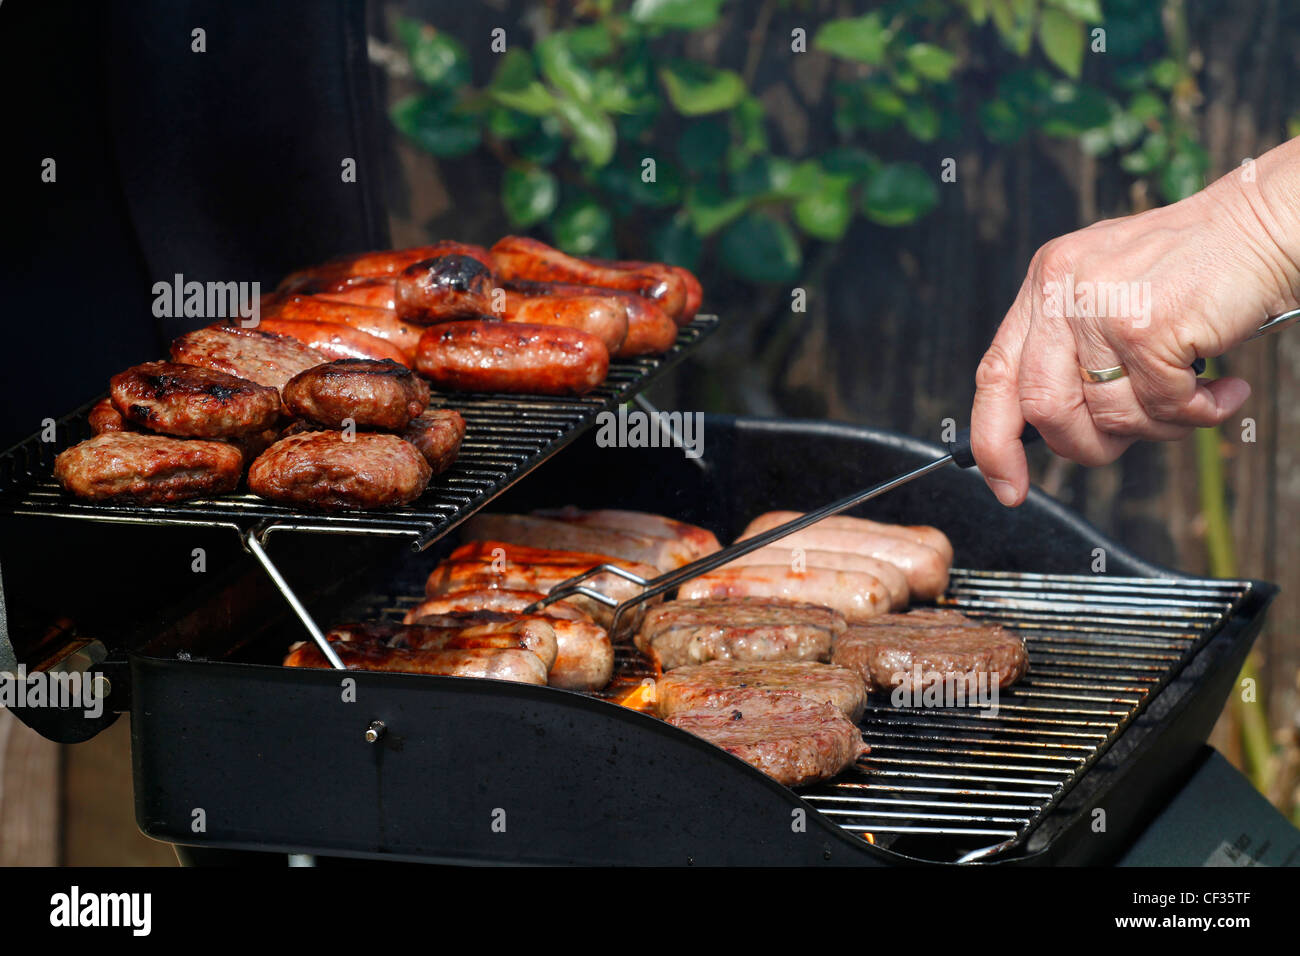 Sausages and burgers cooking on a barbecue. Stock Photo